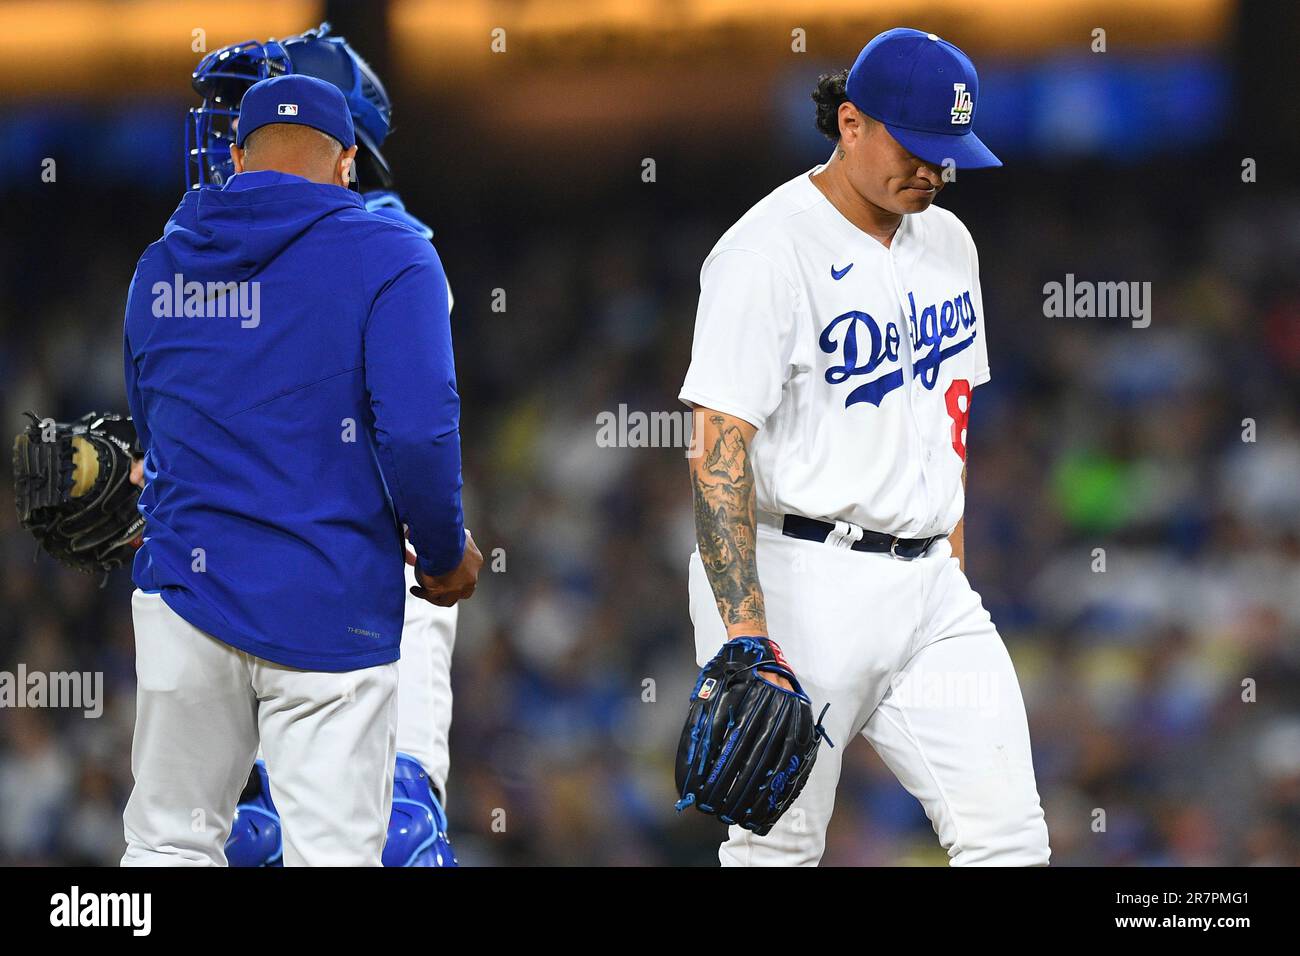 LOS ANGELES, CA - MAY 03: Los Angeles Dodgers Pitcher Victor Gonzalez (81)  pitches during the game between the Phillies and the Dodgers on May 03,  2023, at Dodger Stadium in Los